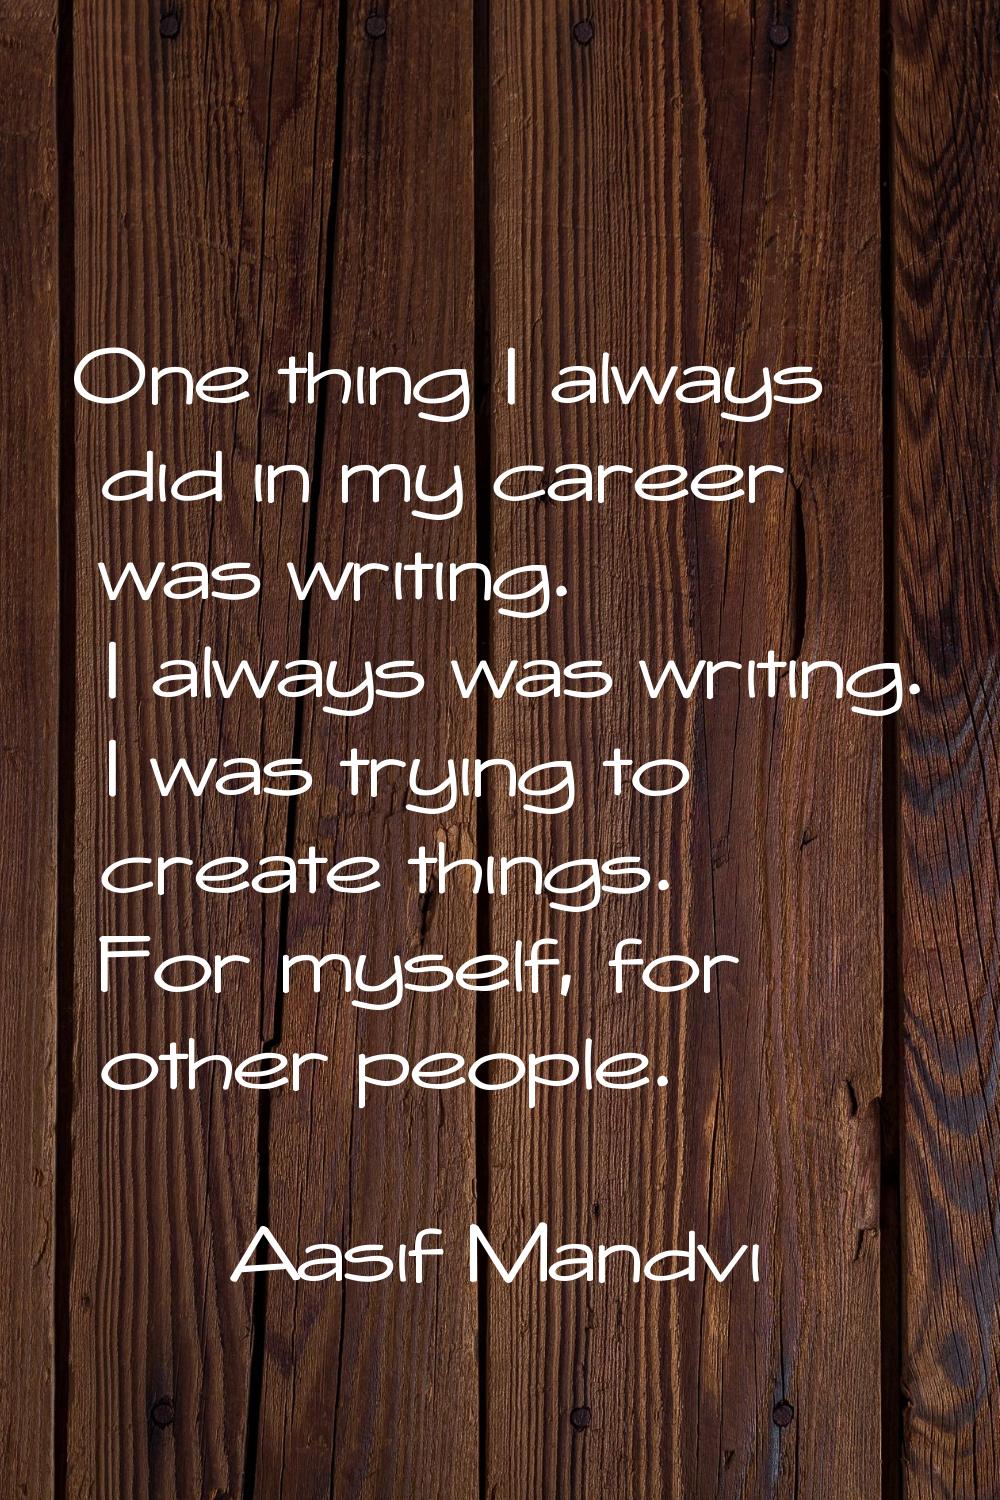 One thing I always did in my career was writing. I always was writing. I was trying to create thing